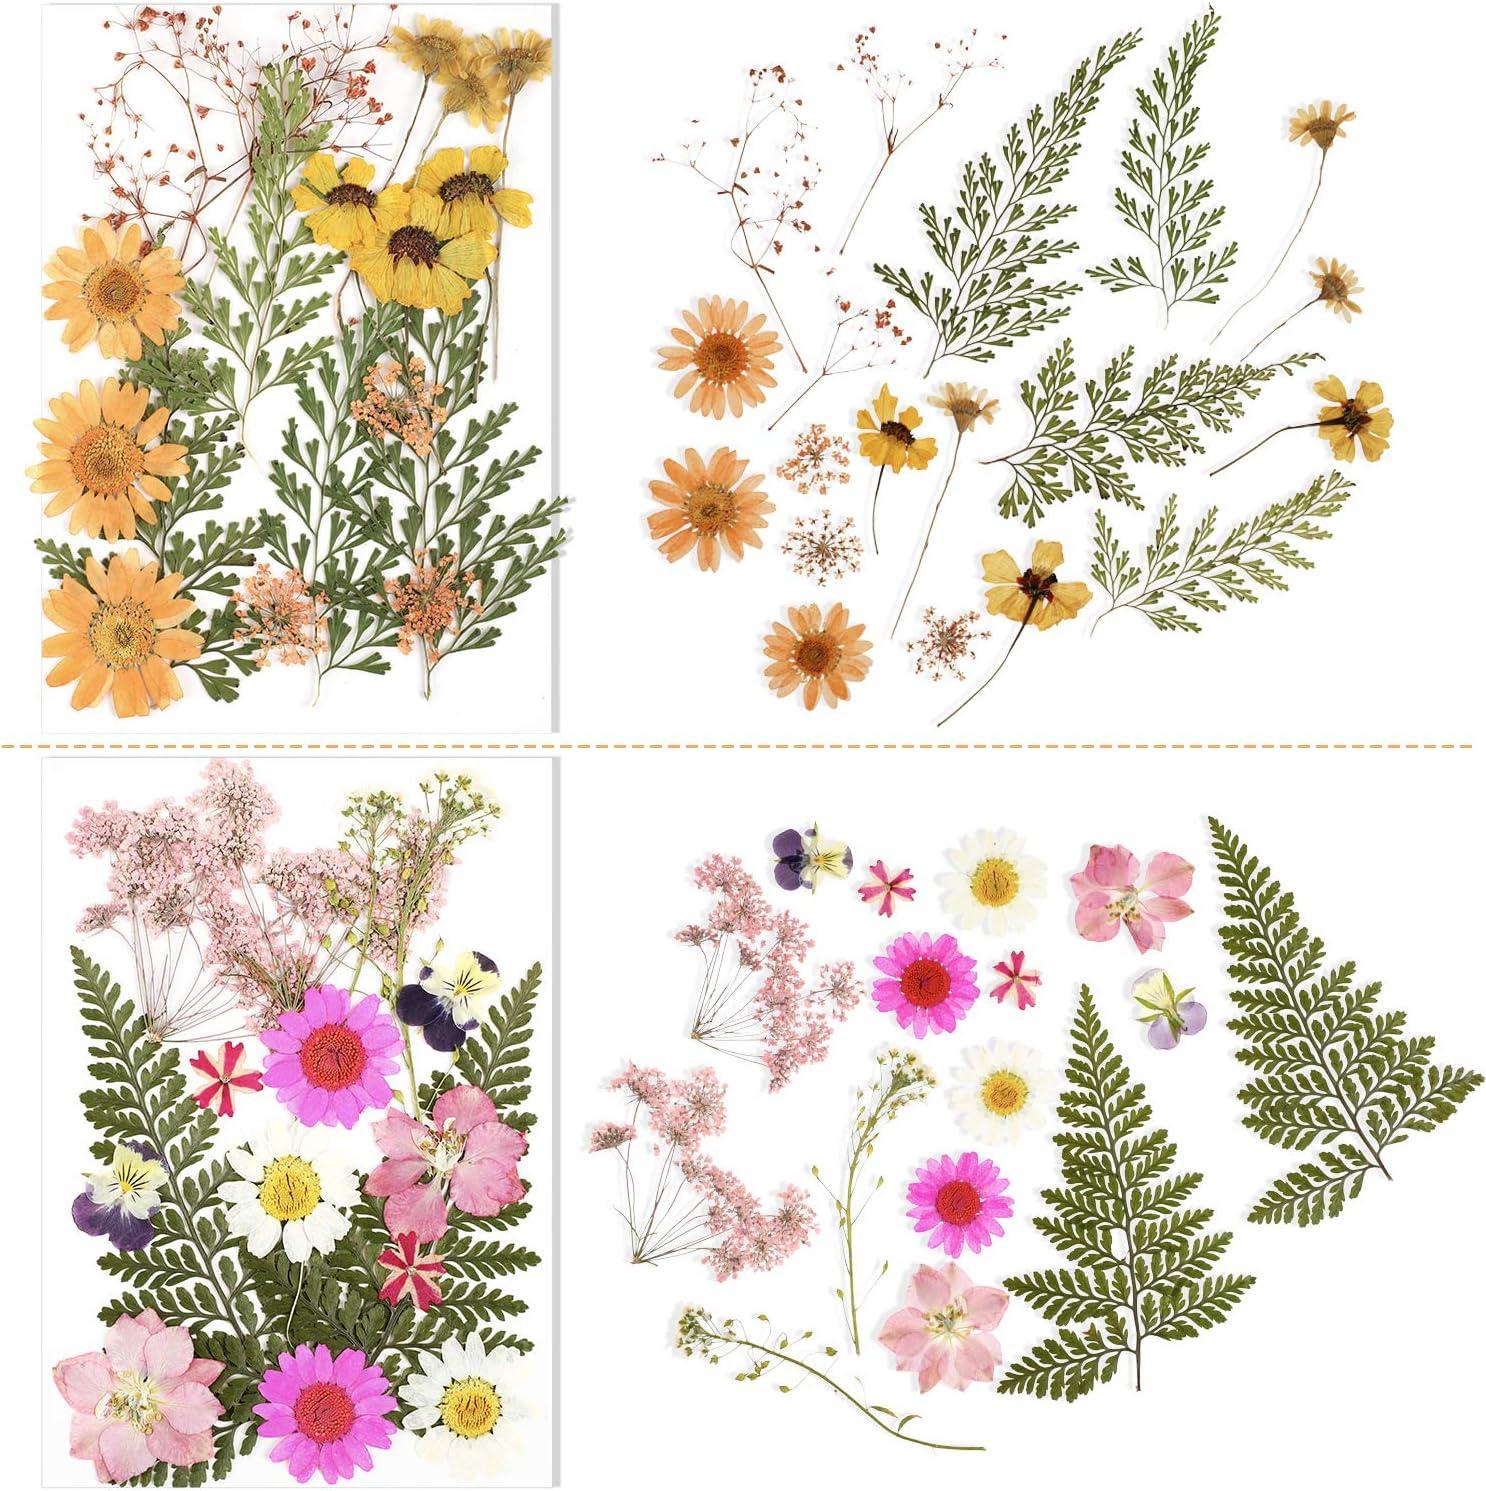 Auidy_6TXD Pressed Dried Flowers for Resin, Mixed Multiple Natural Daisy  Flowers Leaves, Floral Art Craft with Tweezers for Scrapbooking DIY Pendant